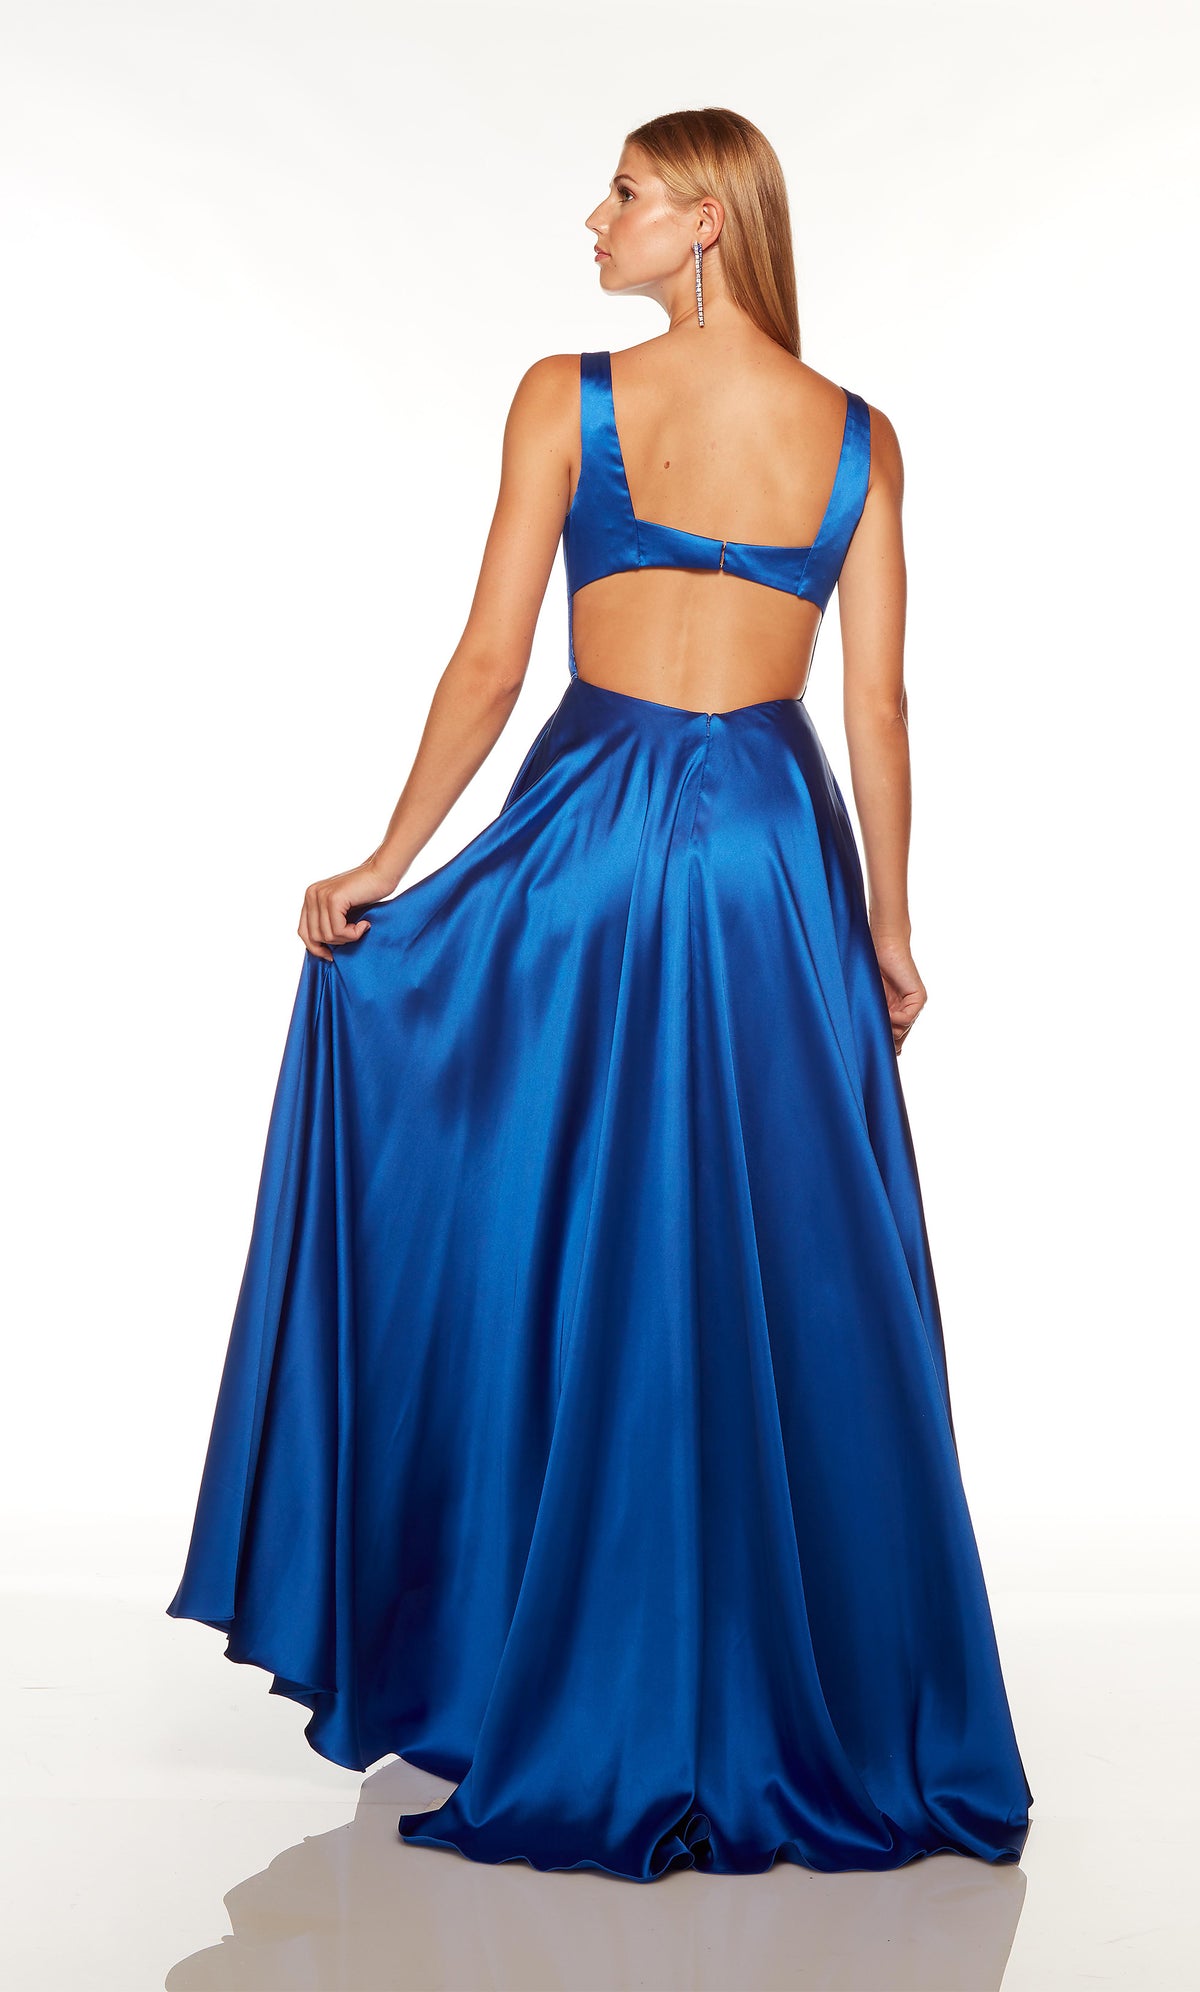 Blue prom dress with a cutout back and train.